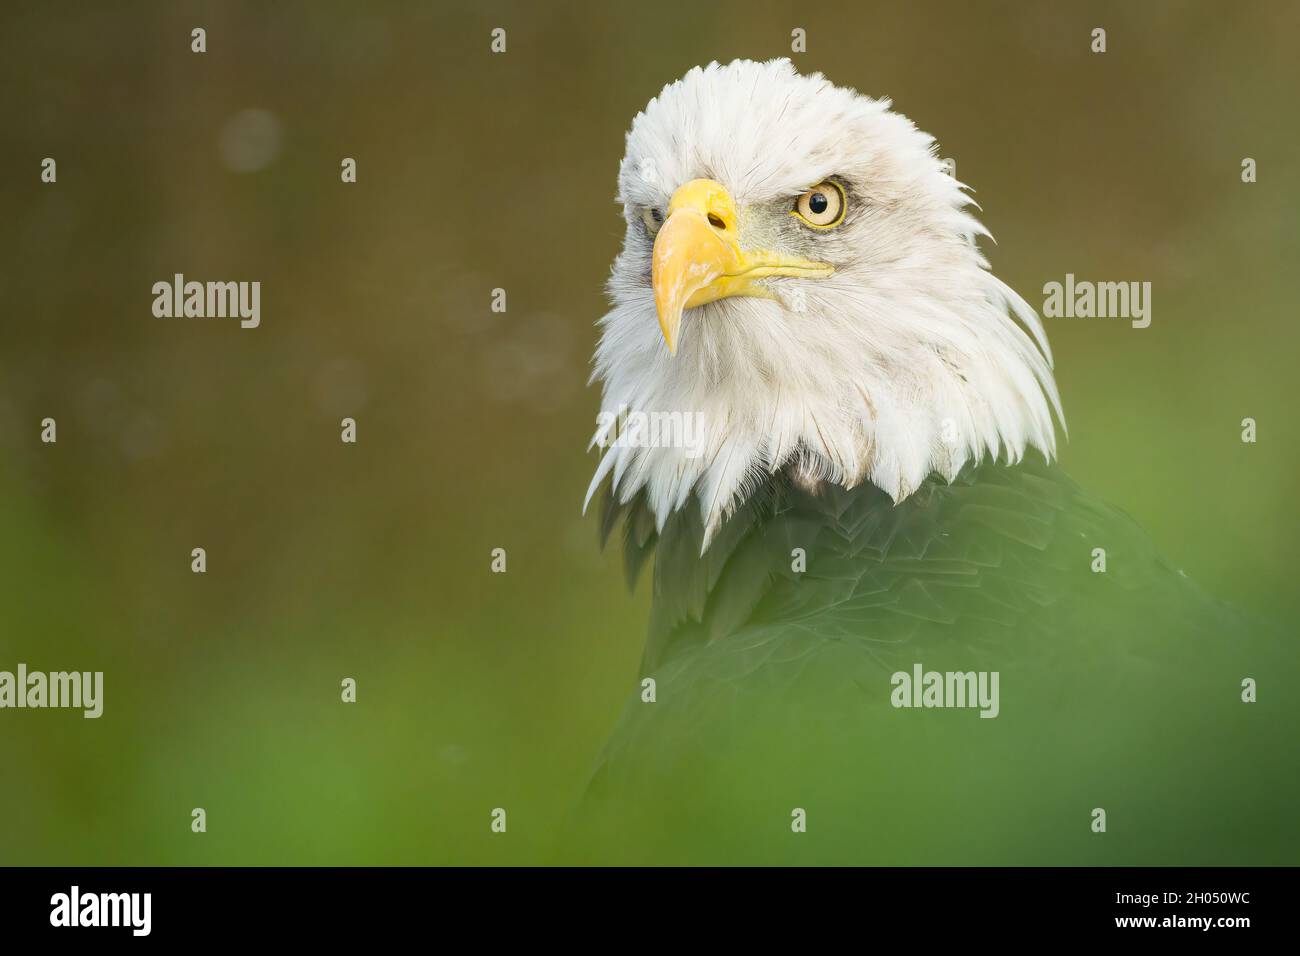 The shark eyes of a Bald eagle is watching it's environment. The bird of prey is slightly obscured by foliage. Stock Photo